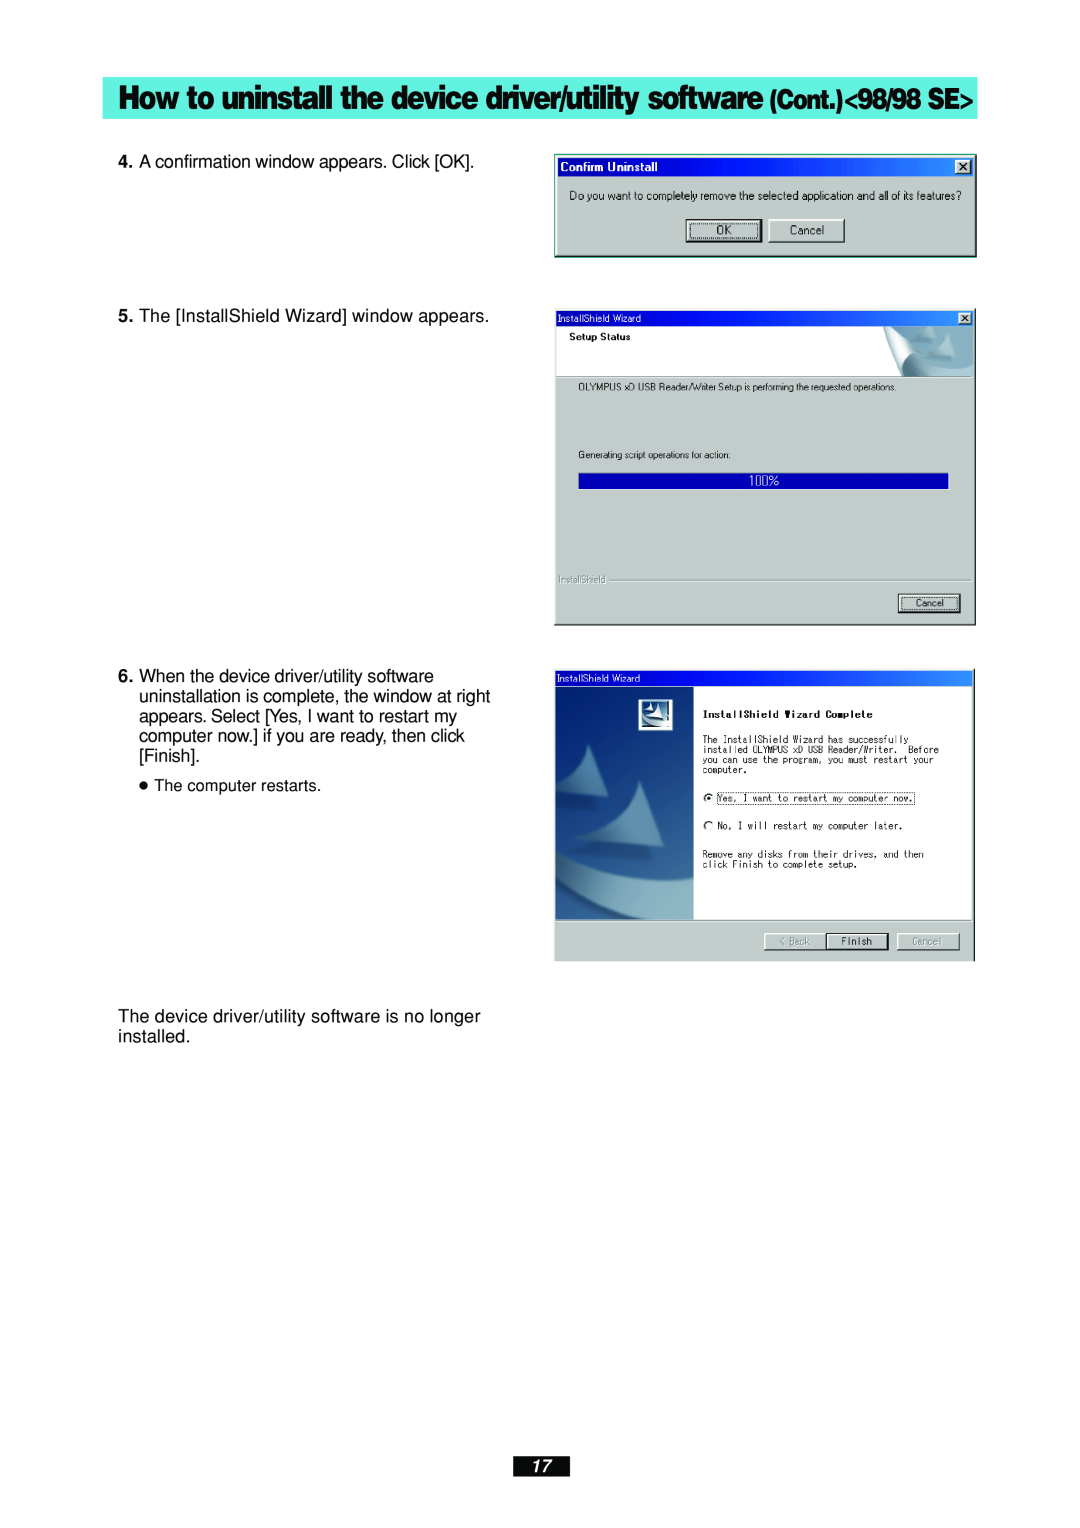 Olympus MAUSB-100 manual How to uninstall the device driver/utility software Cont.98/98 SE 